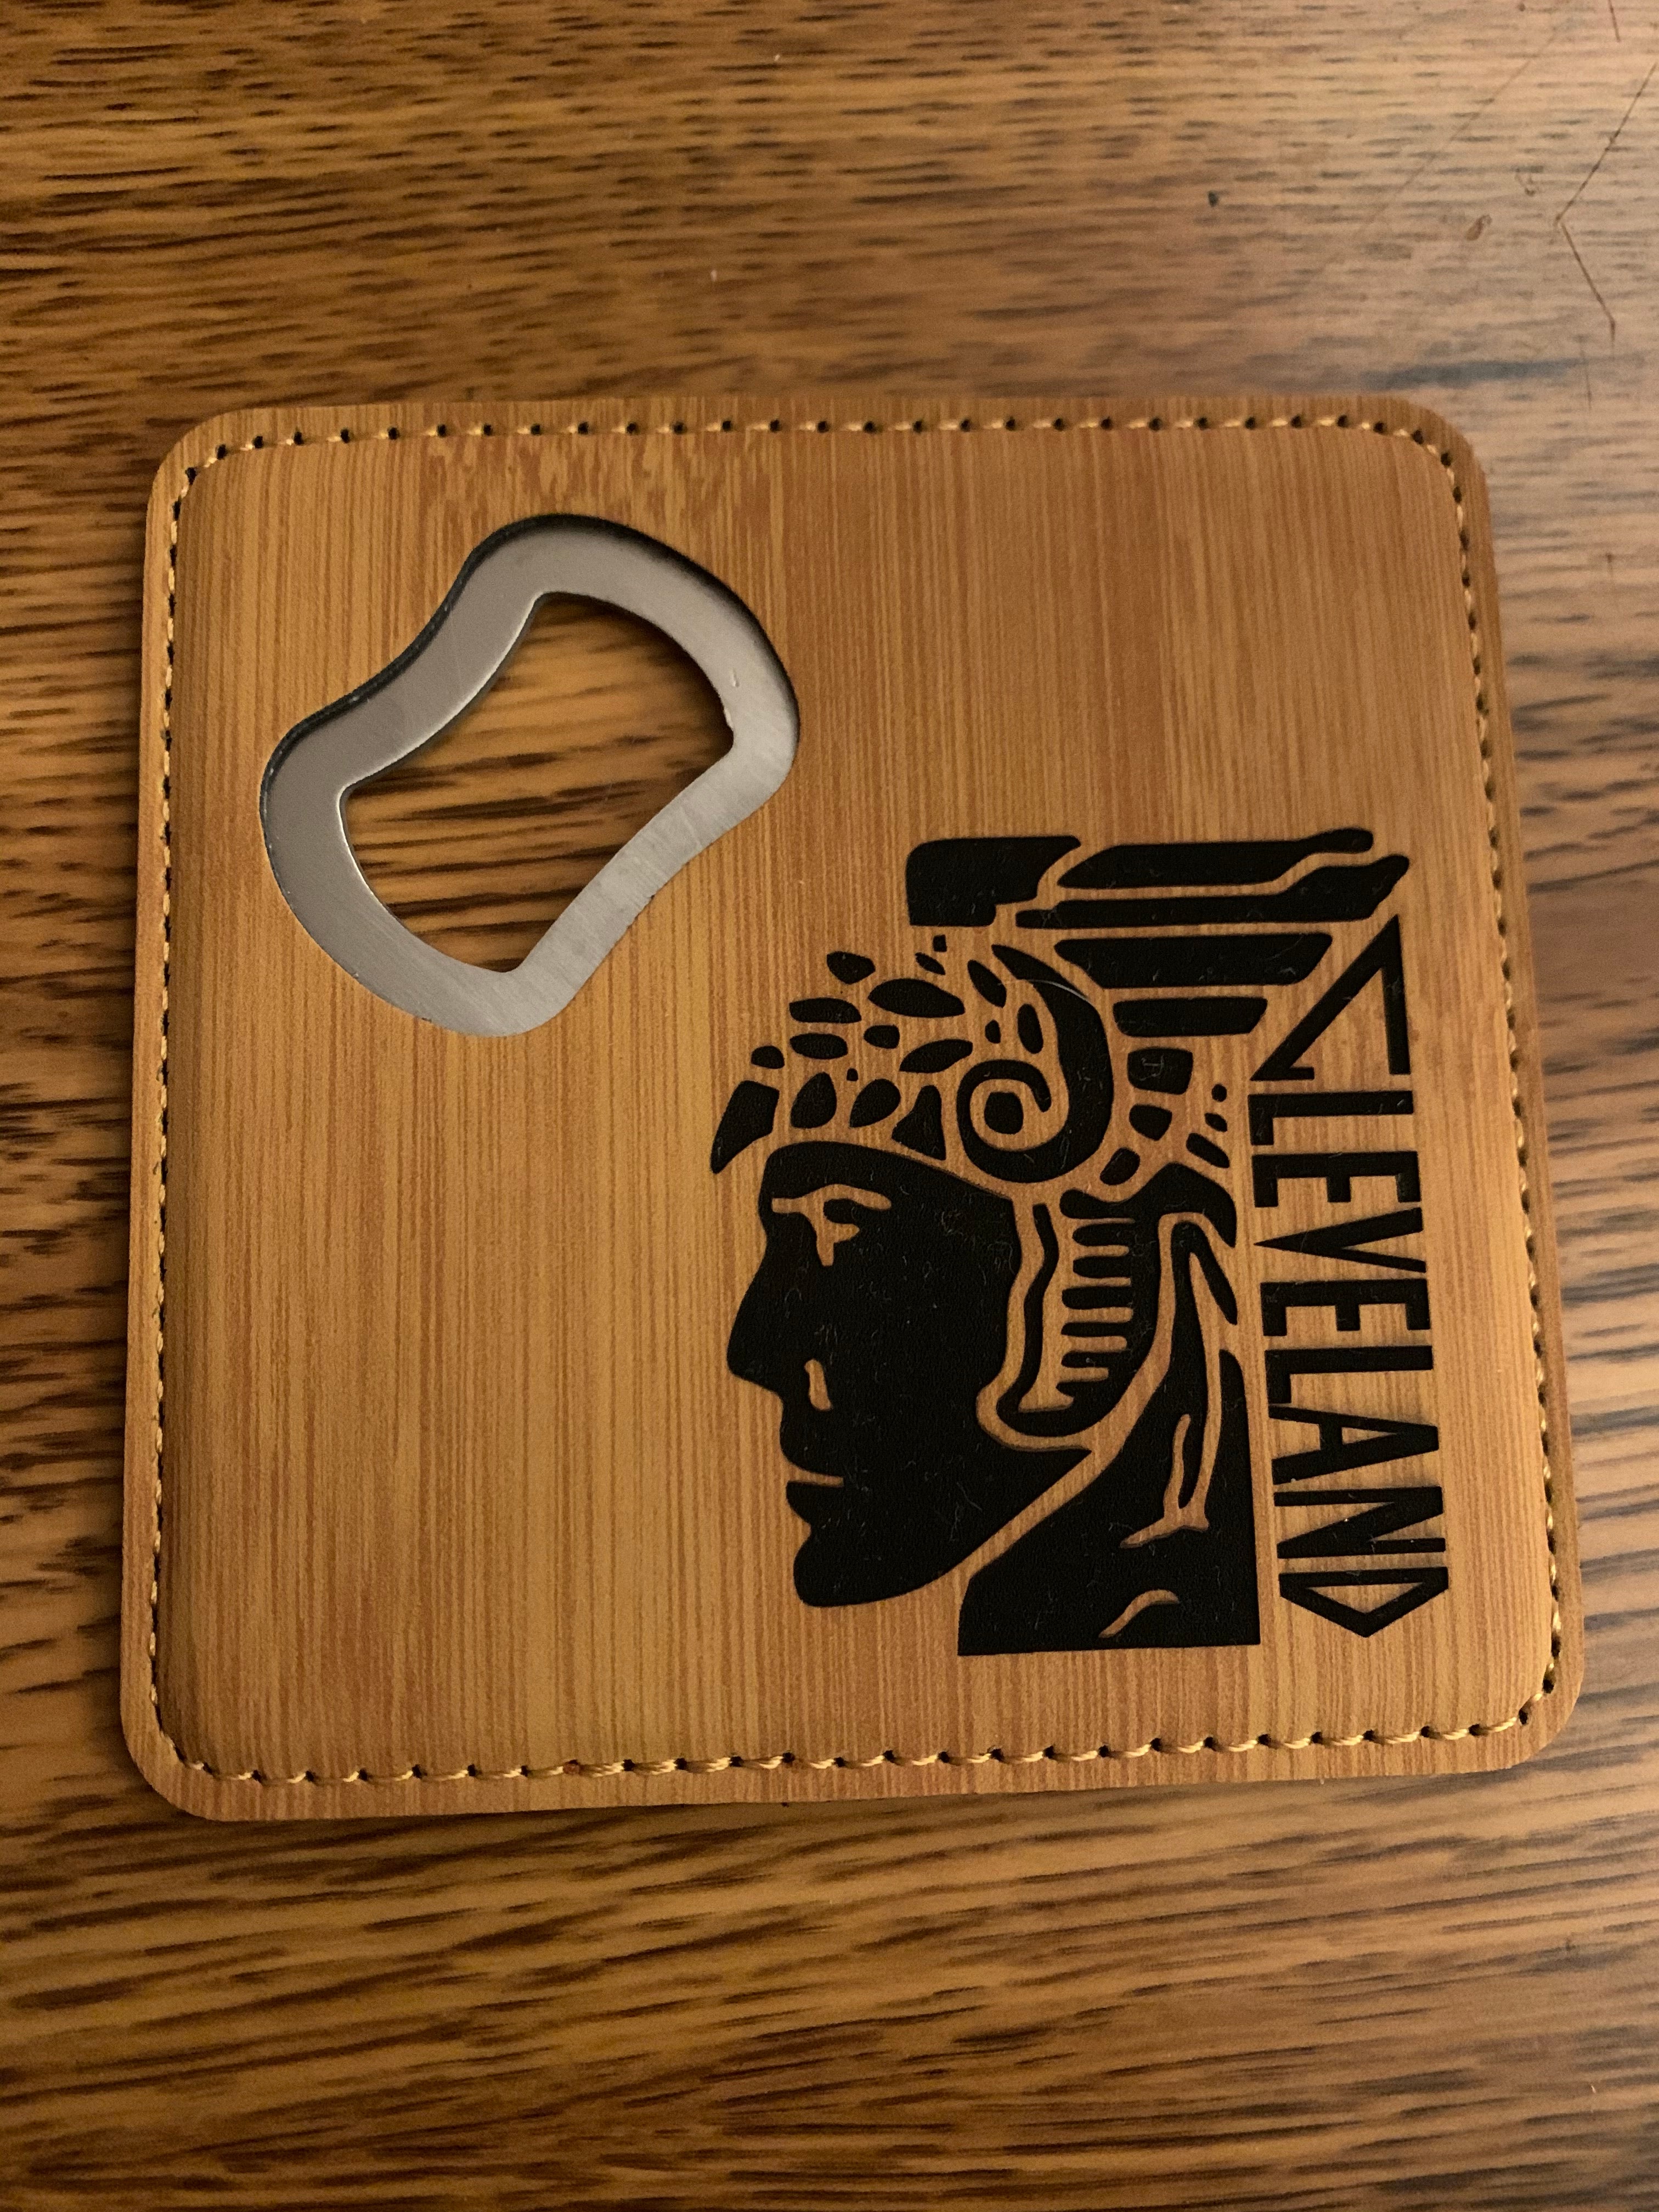 Cleveland Themed Bottle Openers / Coasters